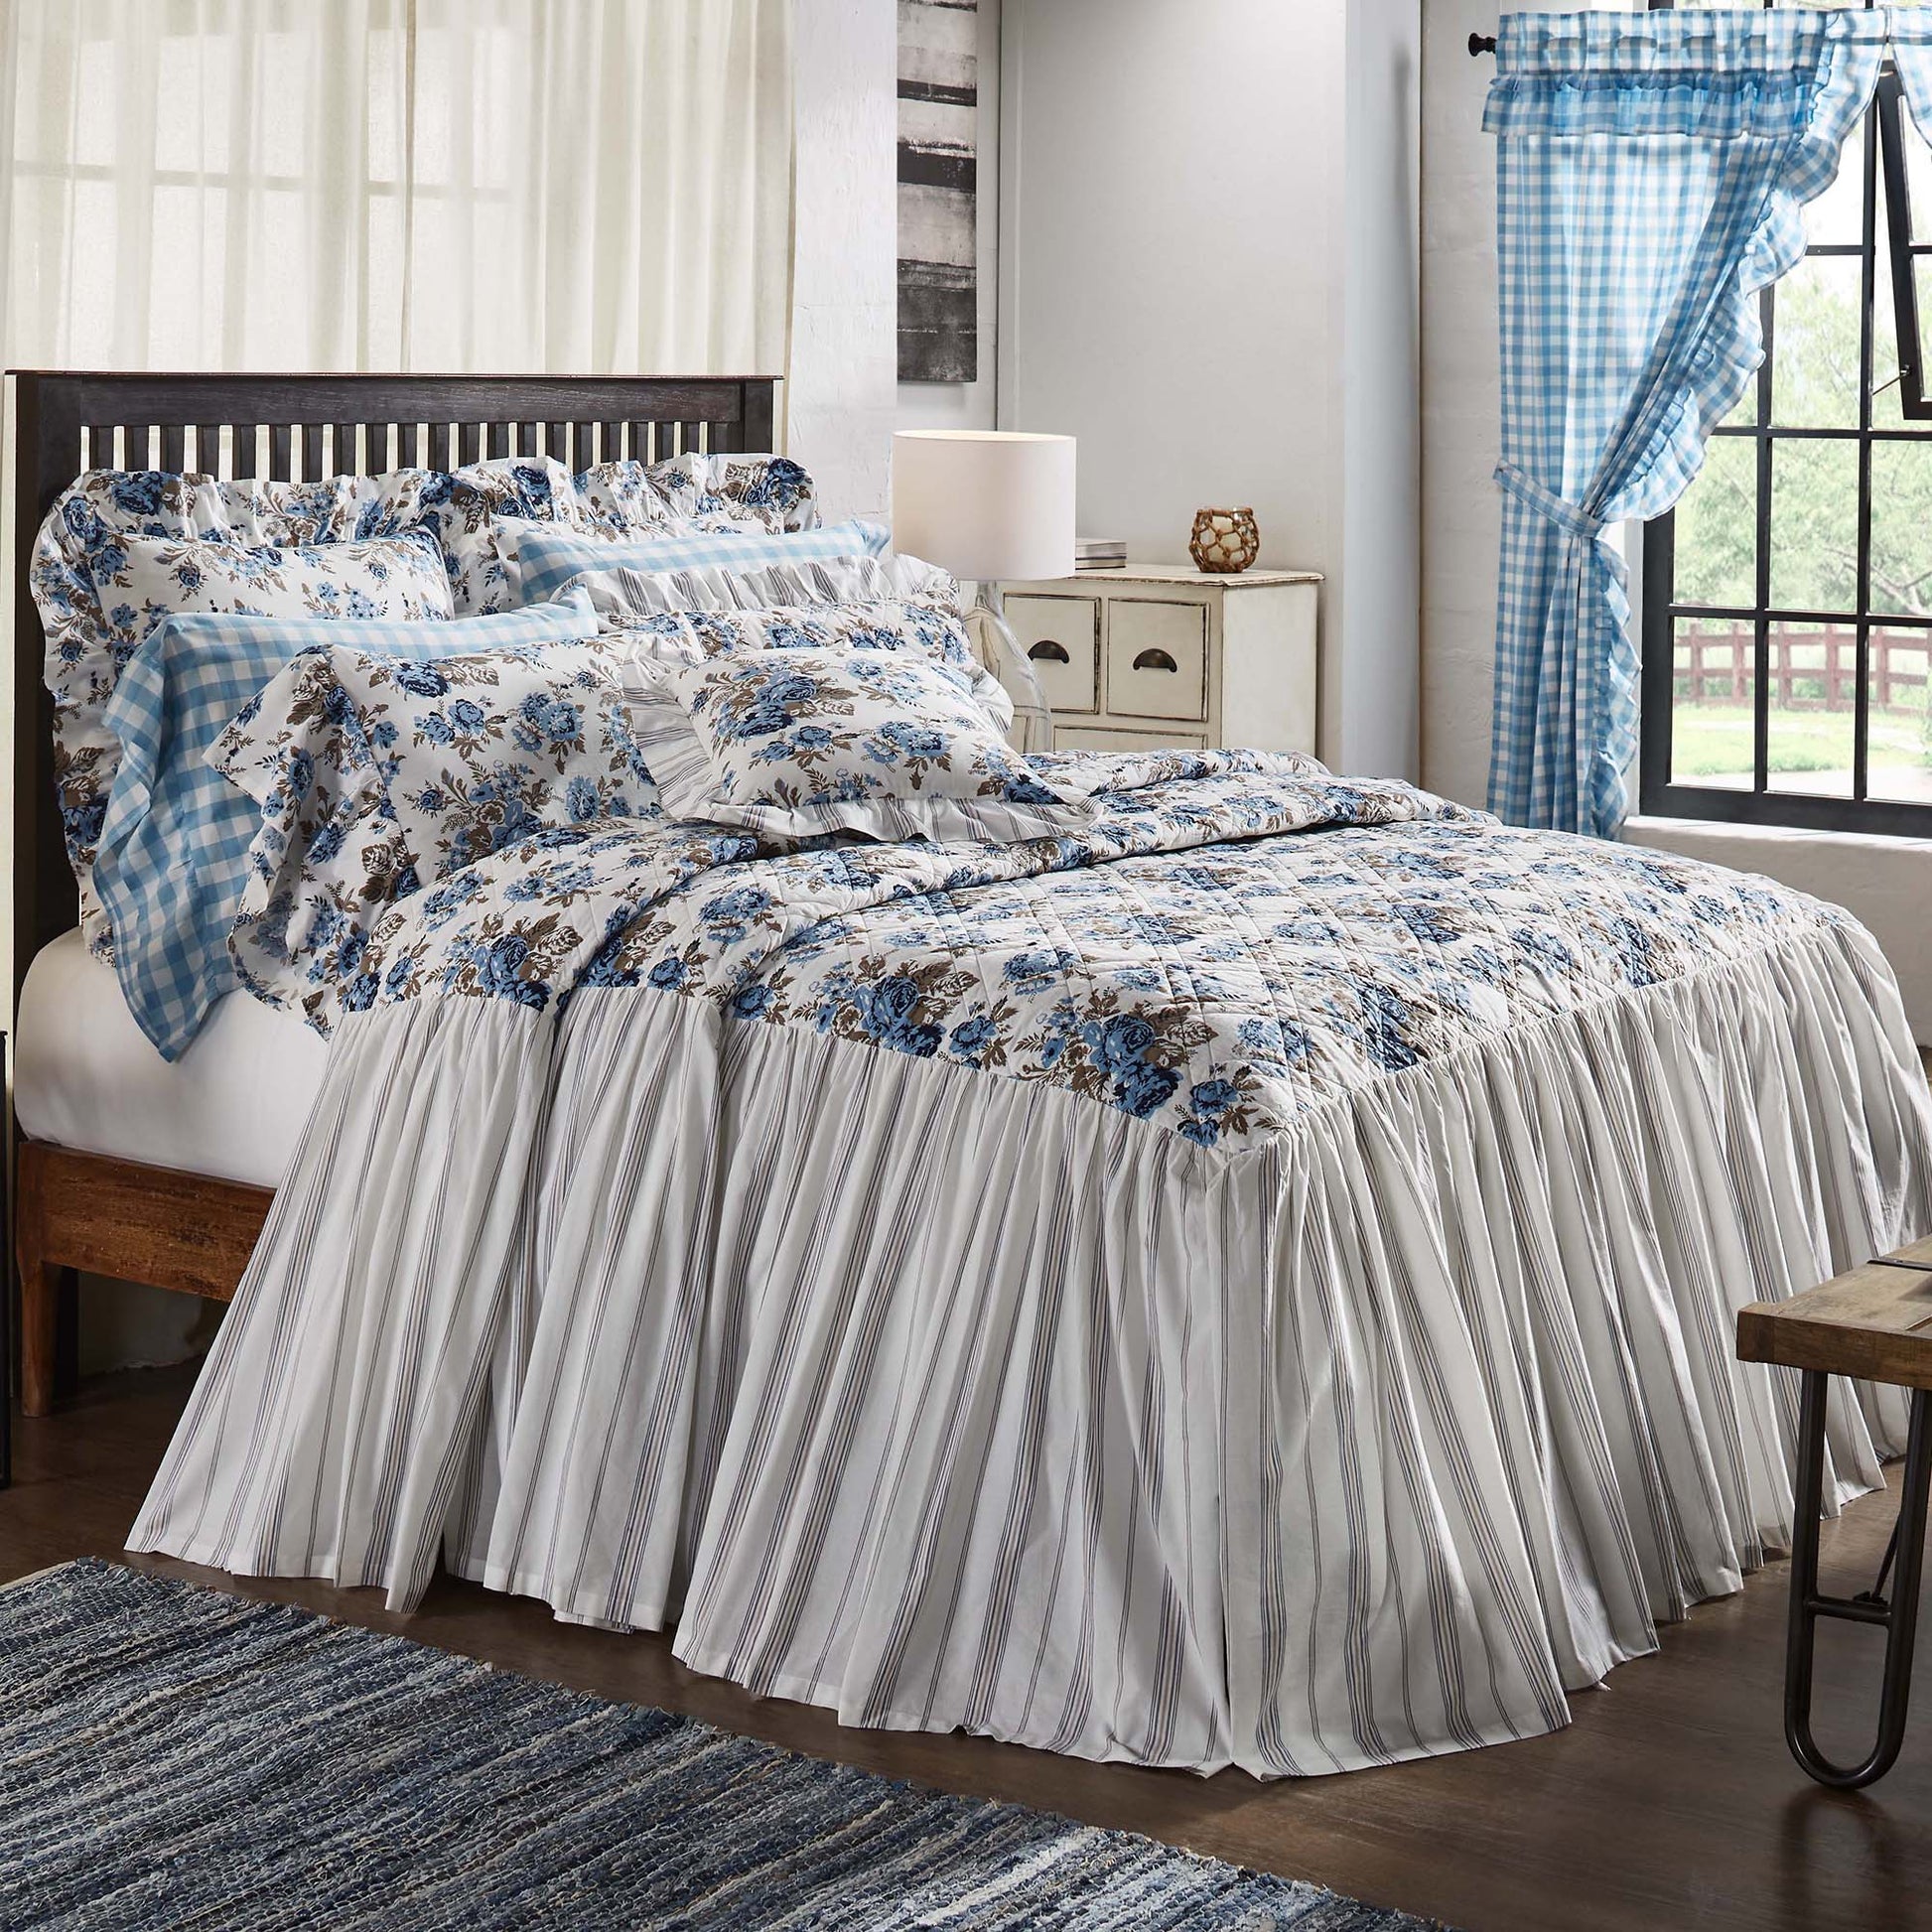 69995-Annie-Blue-Floral-Ruffled-Queen-Coverlet-80x60-27-image-5